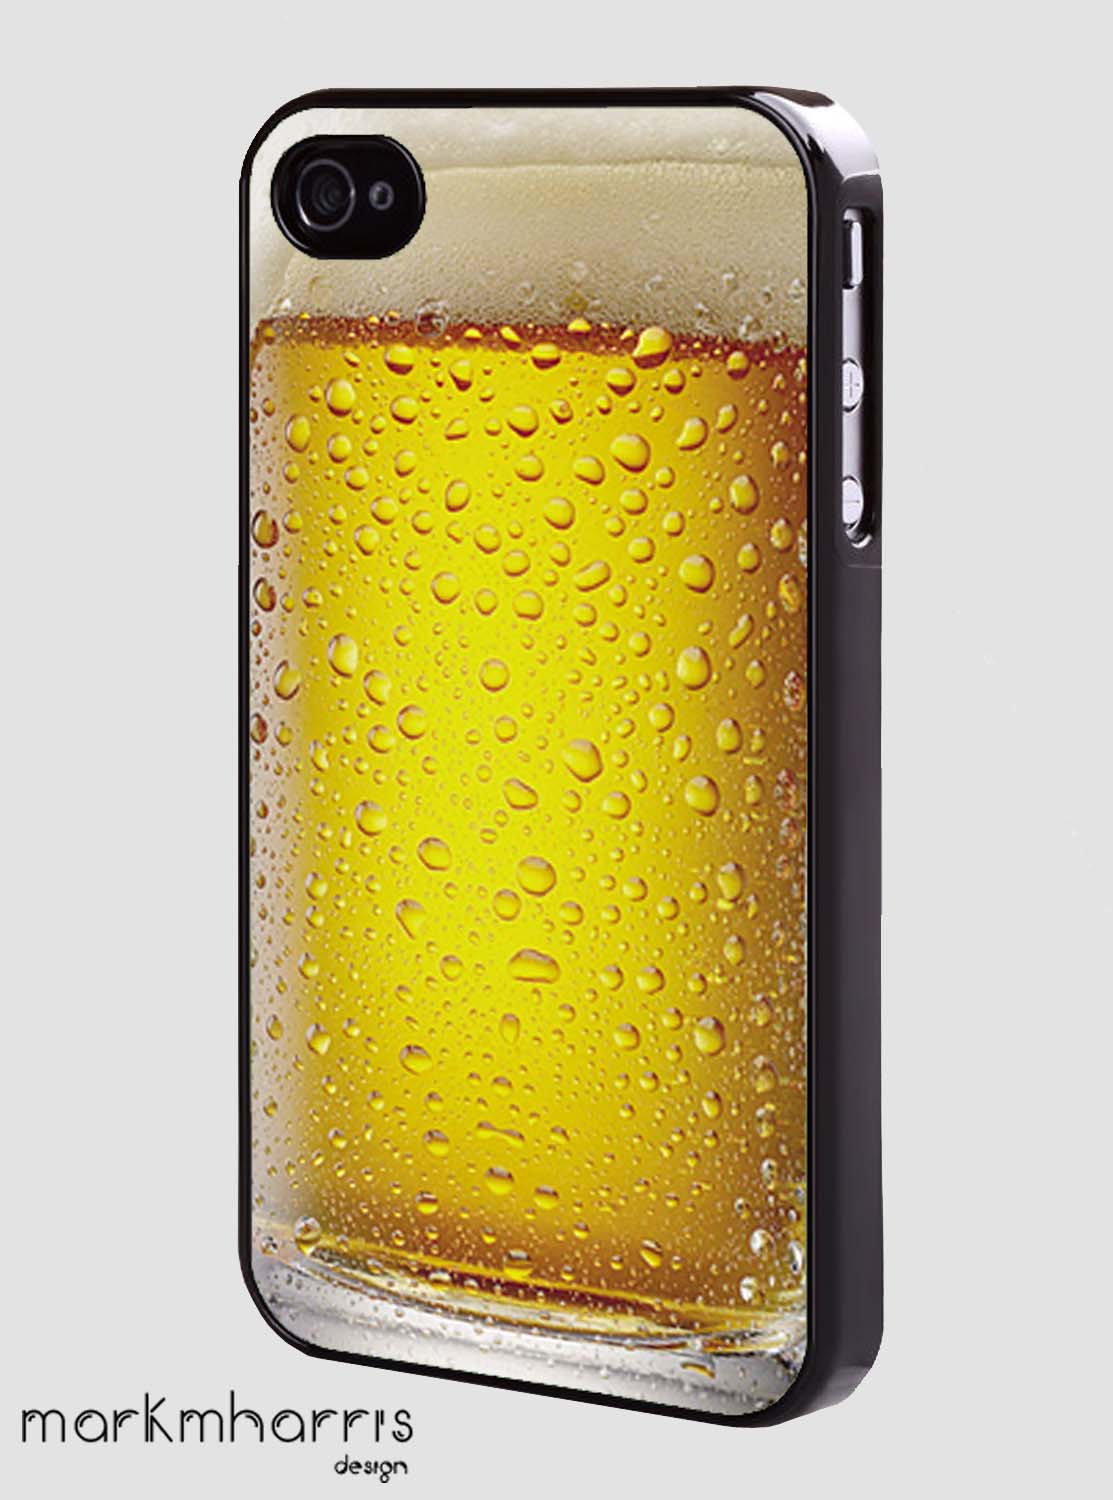 Beer Glass - Hard Case Cover For Iphone 4/4s Also Iphone 5